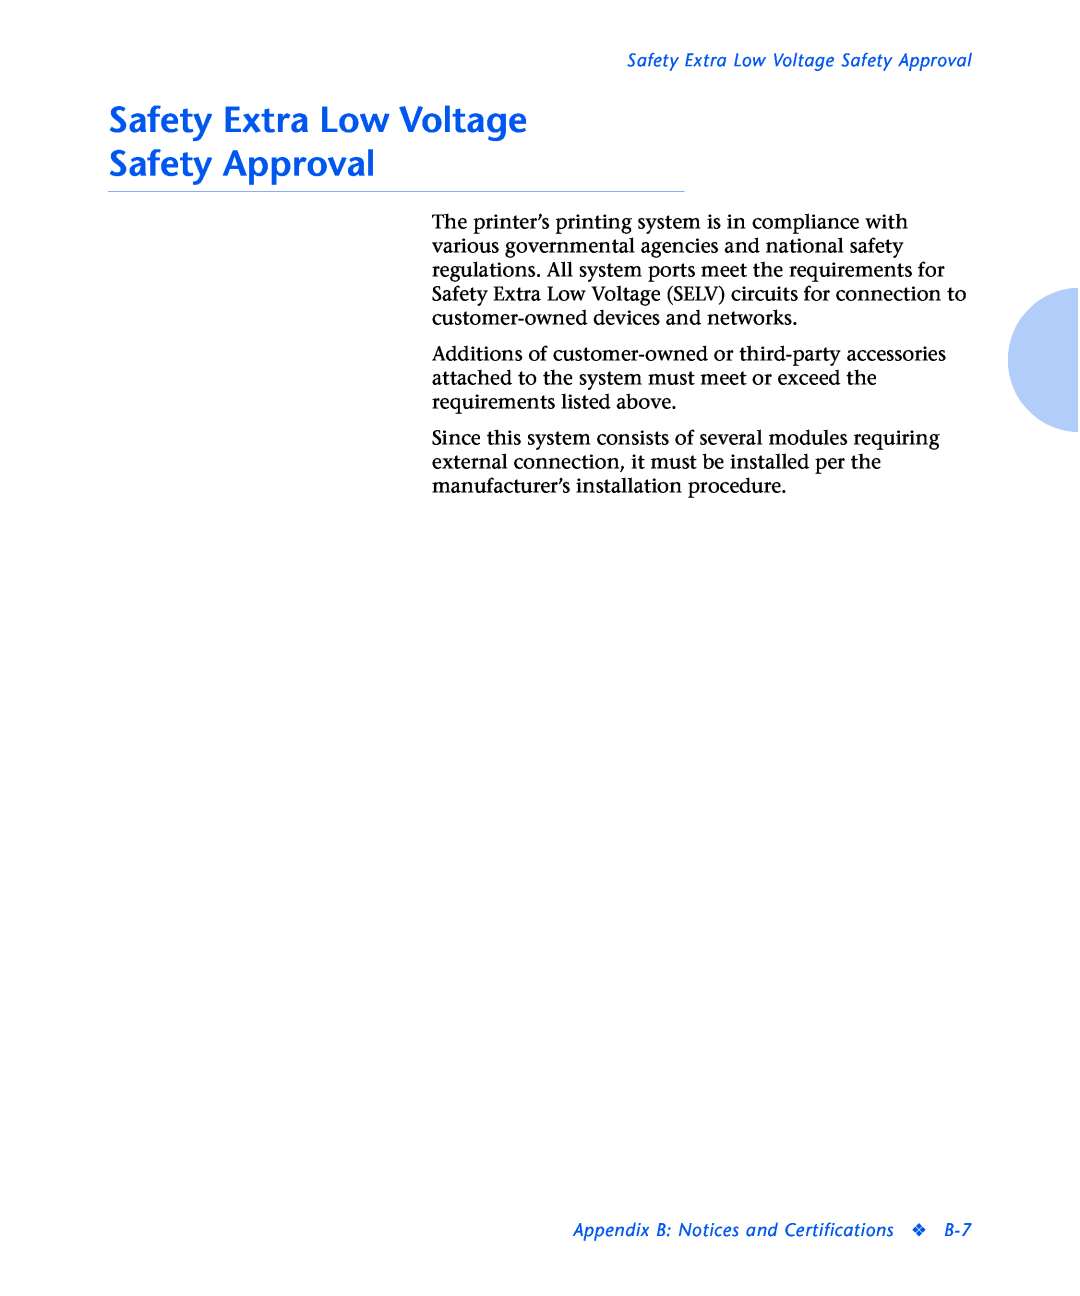 Xerox N2125 manual Safety Extra Low Voltage Safety Approval, Appendix B Notices and Certifications B-7 